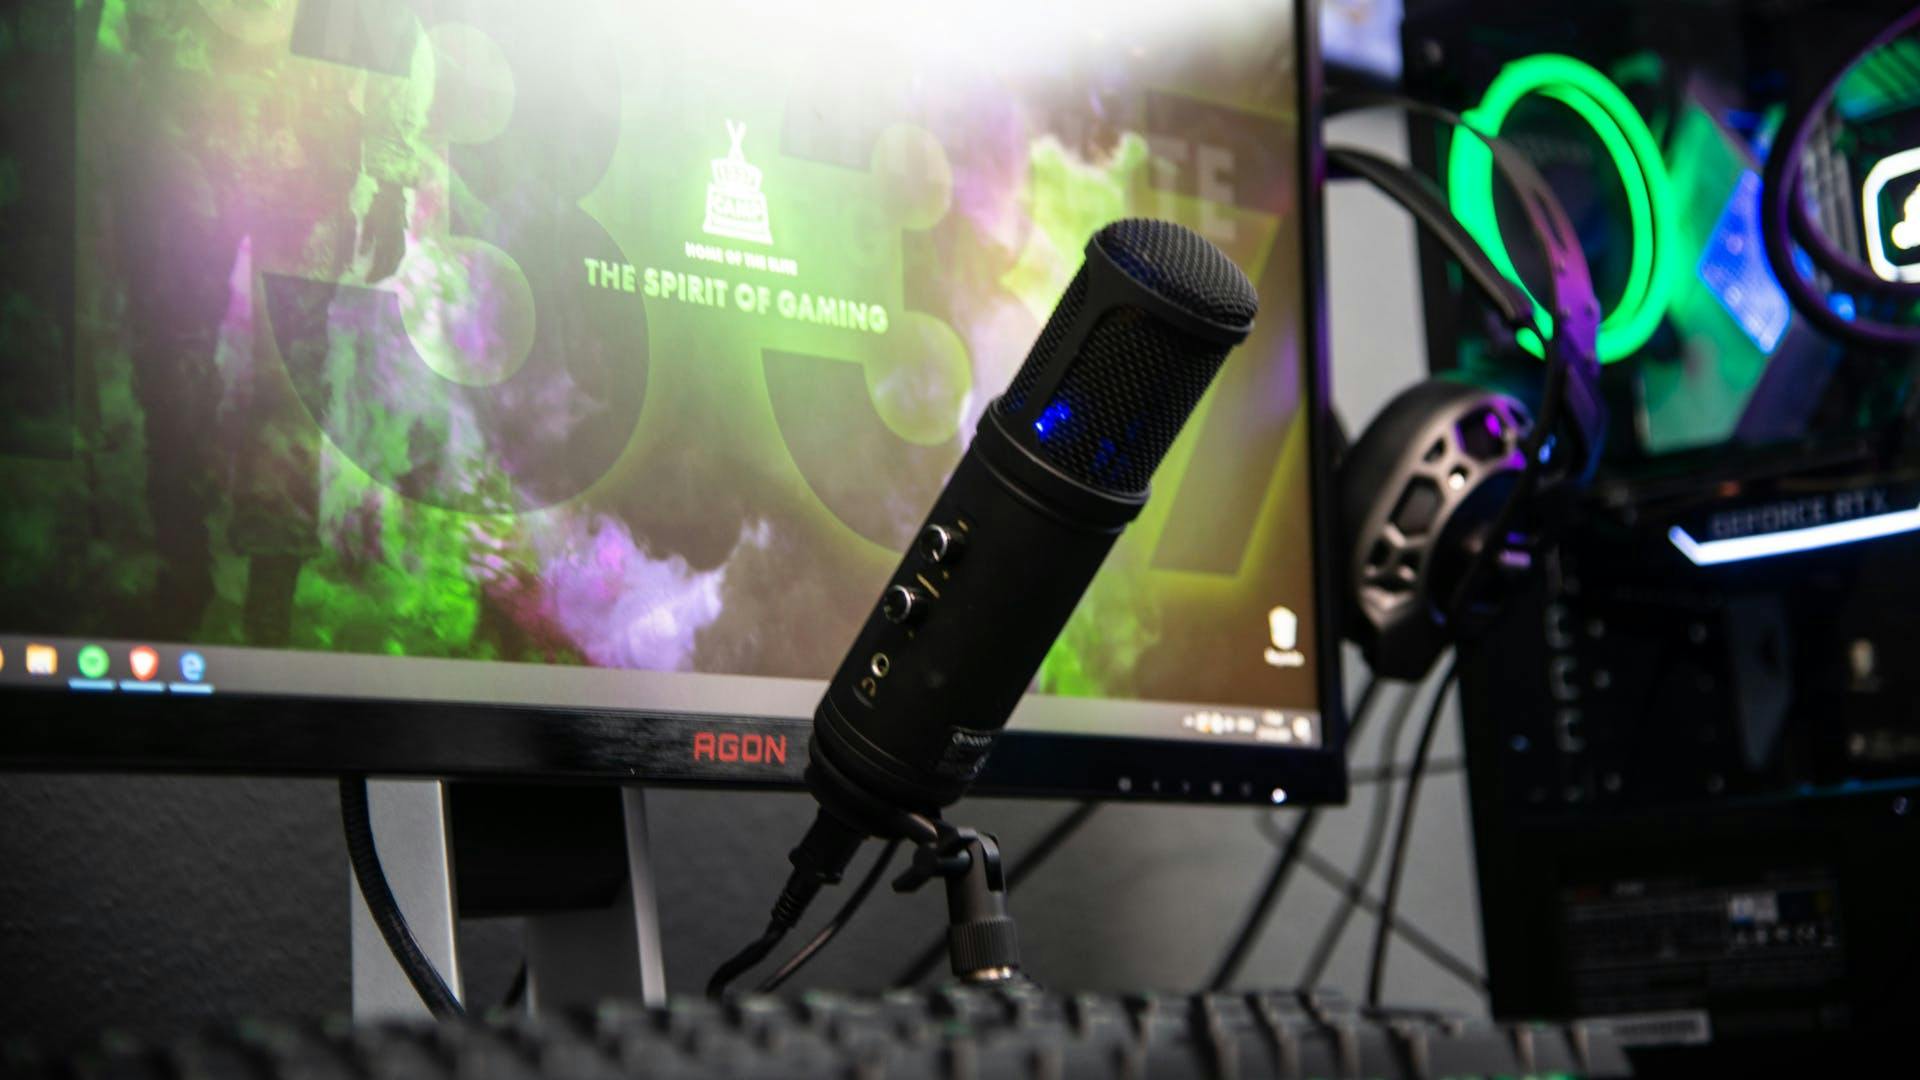 A professional microphone on a boom arm in front of a gaming monitor and an LED gaming PC